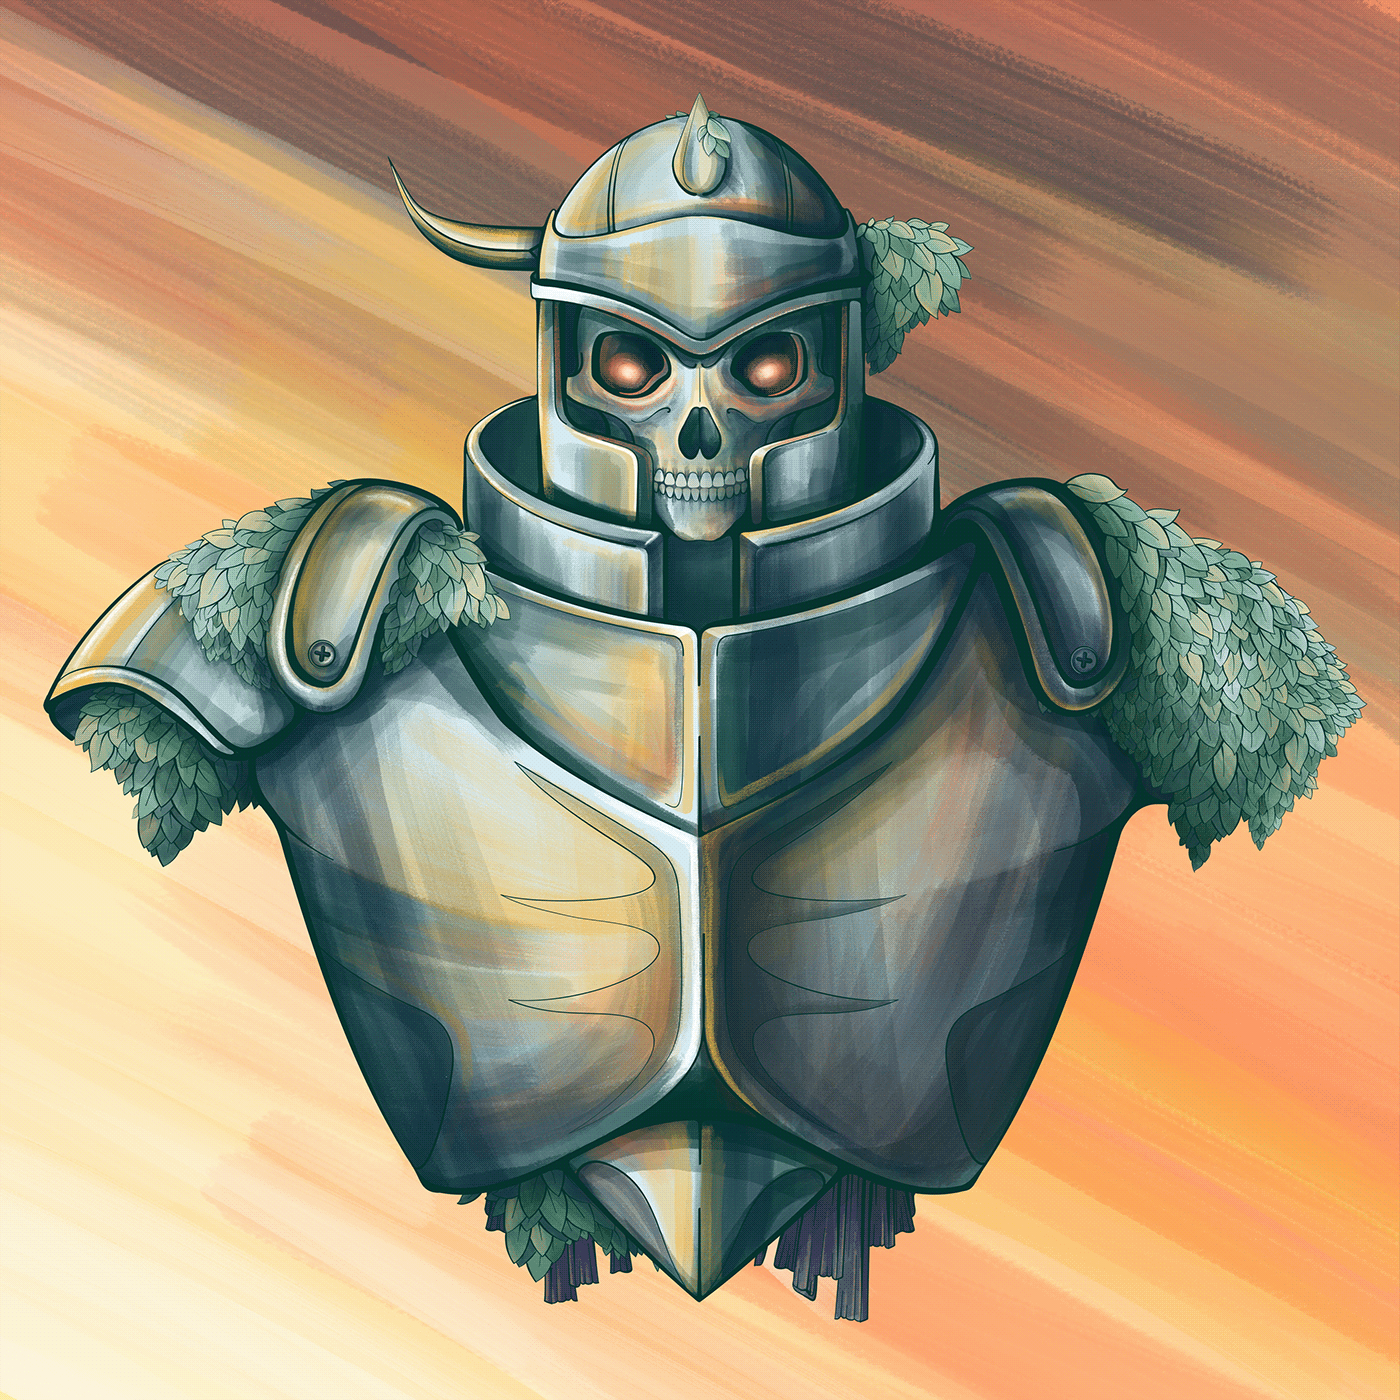 Final Painting of suit of armor with leaves growing out, based on ancient hero from zelda.